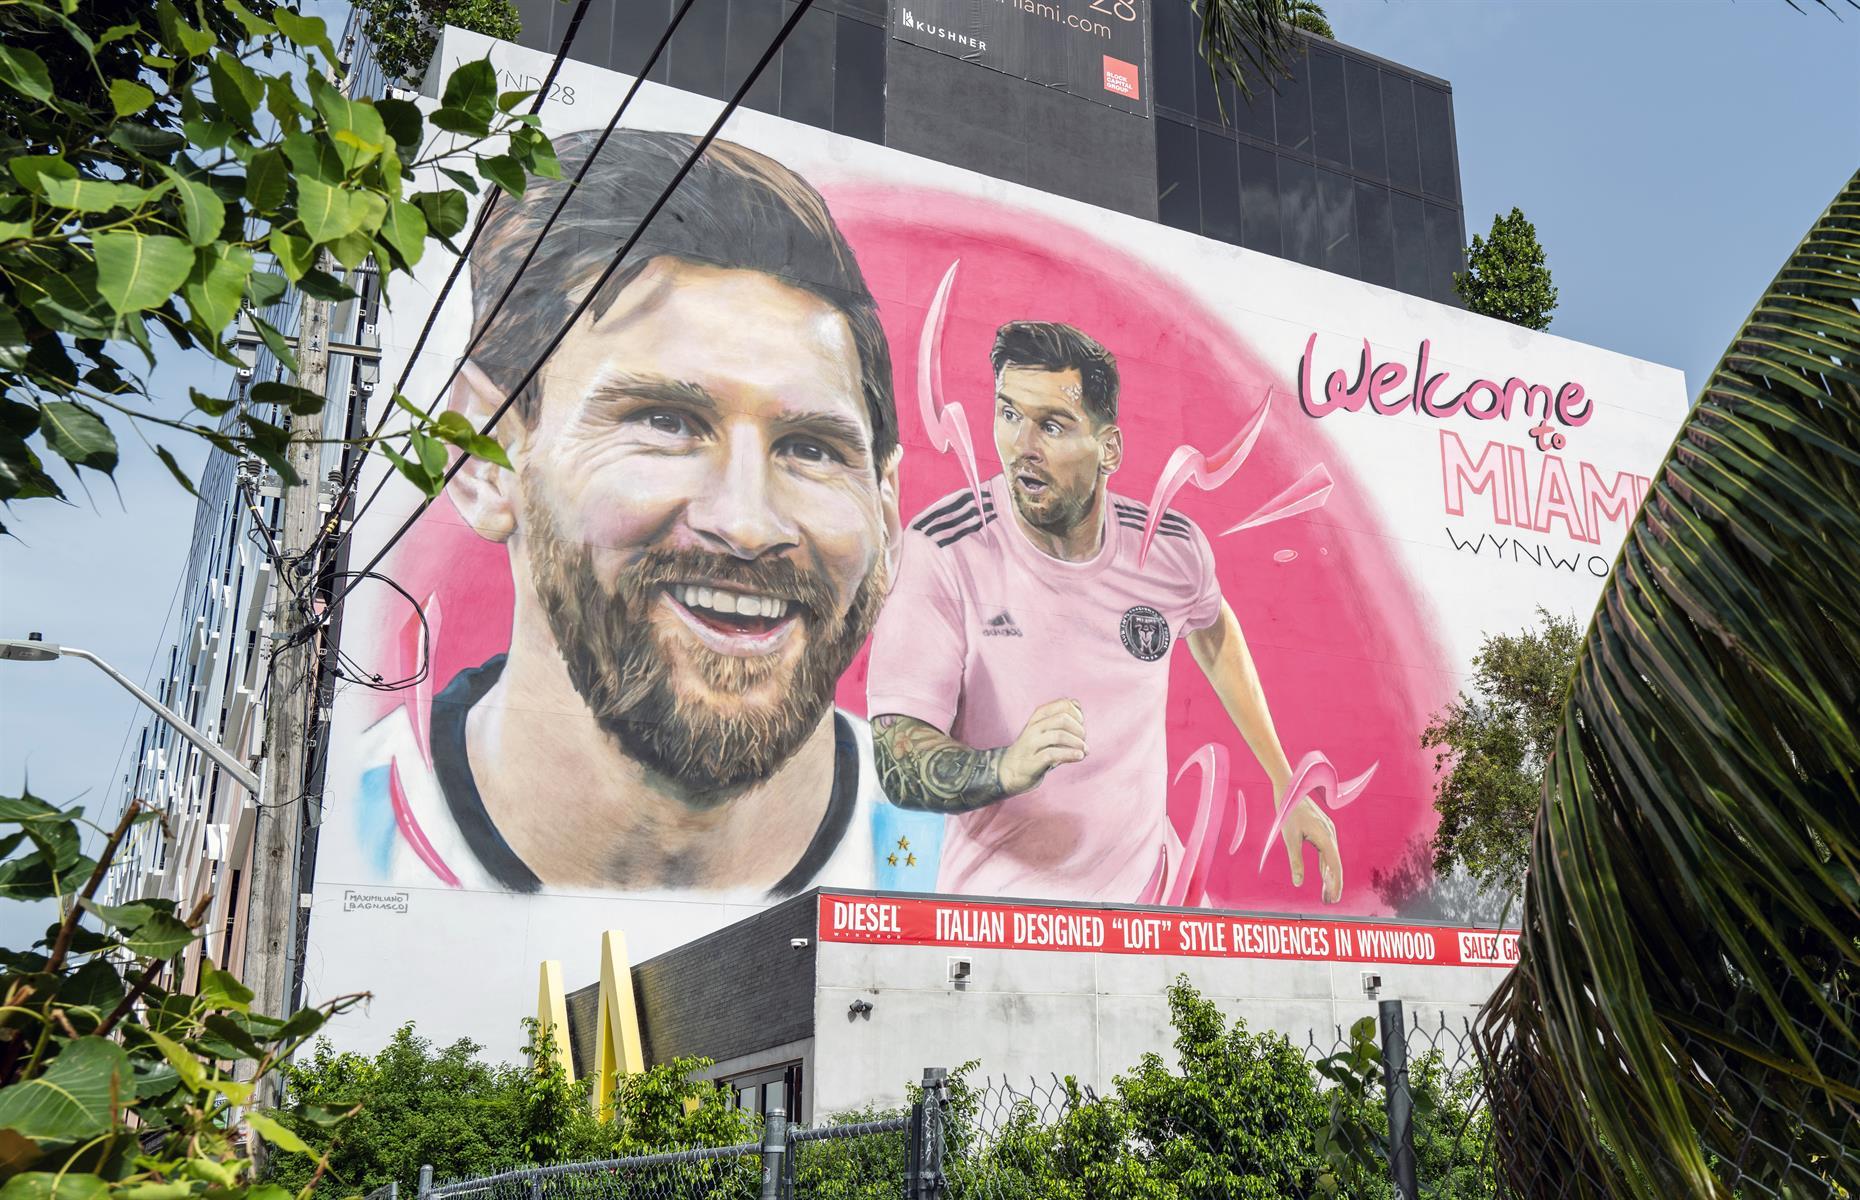 <p>Ever since Lionel Messi was signed by Inter Miami, he’s become Miami’s biggest celebrity – and whether you’re a football fan or not, there are now plenty of ways to participate in Messi mania while you’re in the city. Wynwood is home to several murals of the soccer star, including one that was exclusively painted by fans from Vice City 1896, Inter Miami’s official group of supporters. Grab a drink-to-go from speciality small-batch coffee roasting company Panther Coffee and check out the artwork on foot.</p>